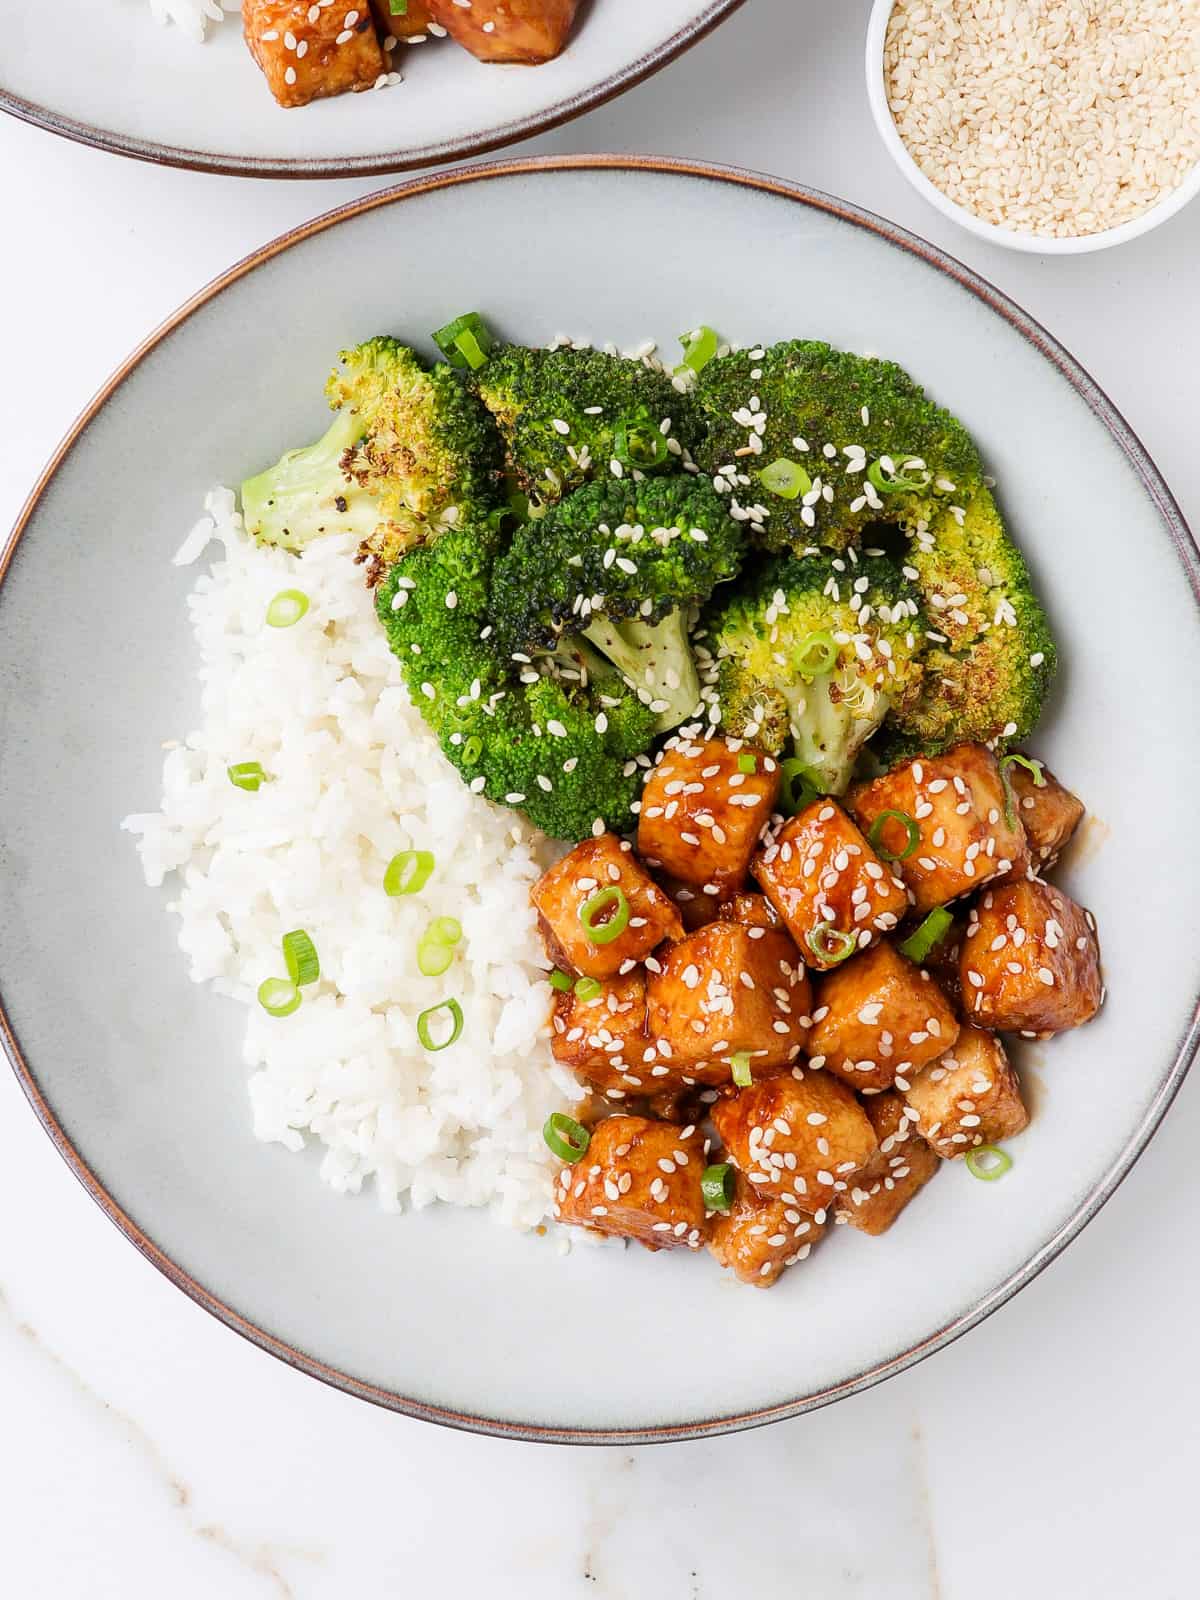 Honey garlic tofu in a bowl with roasted broccoli and rice.